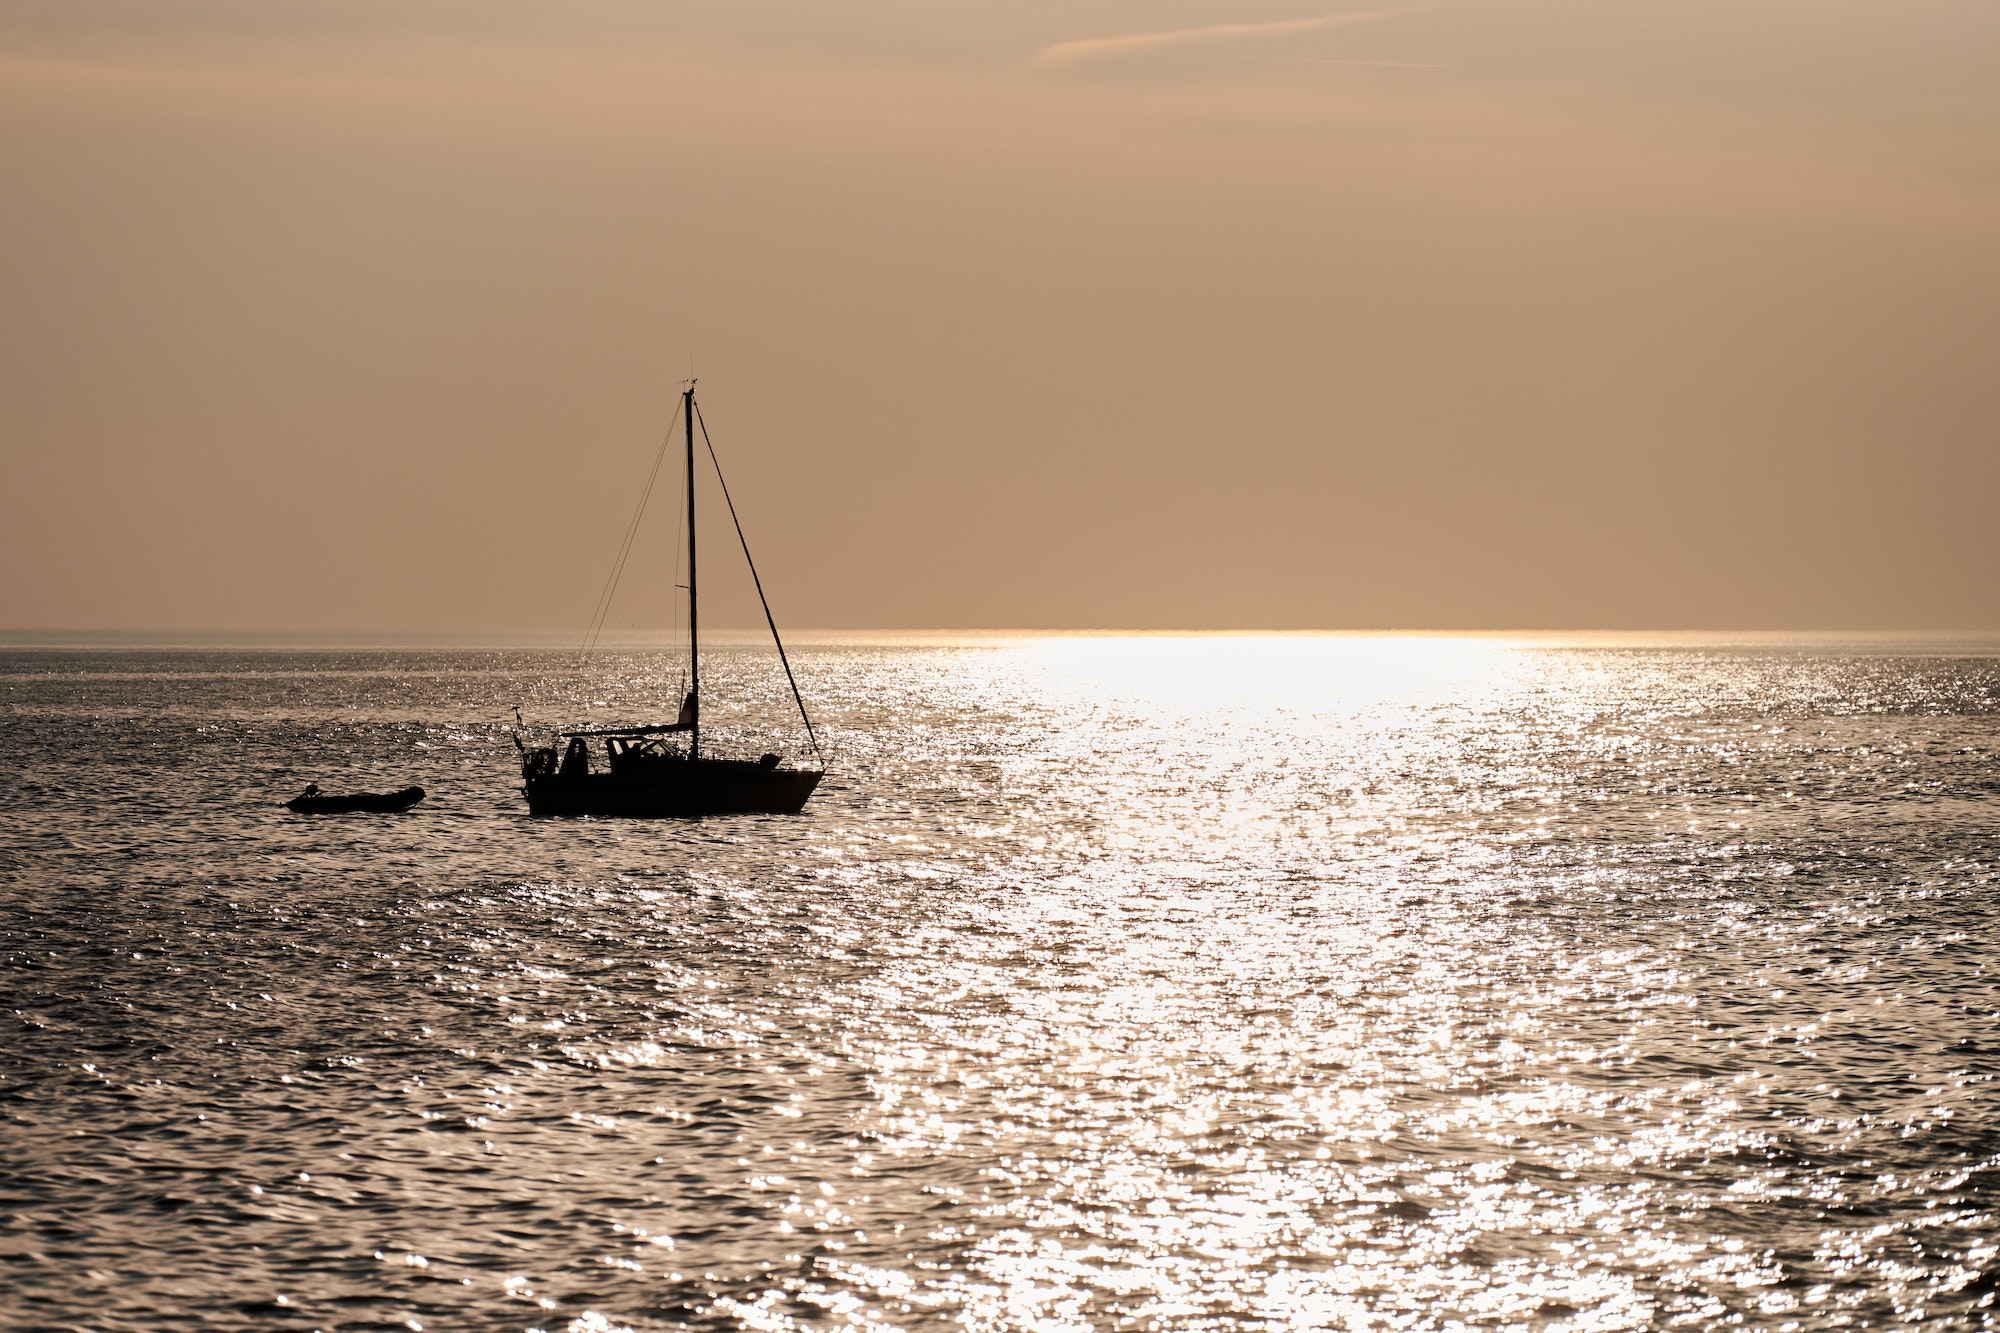 Two sailing boats silhouettes on background of beautiful sunset with reflection in calm seawater